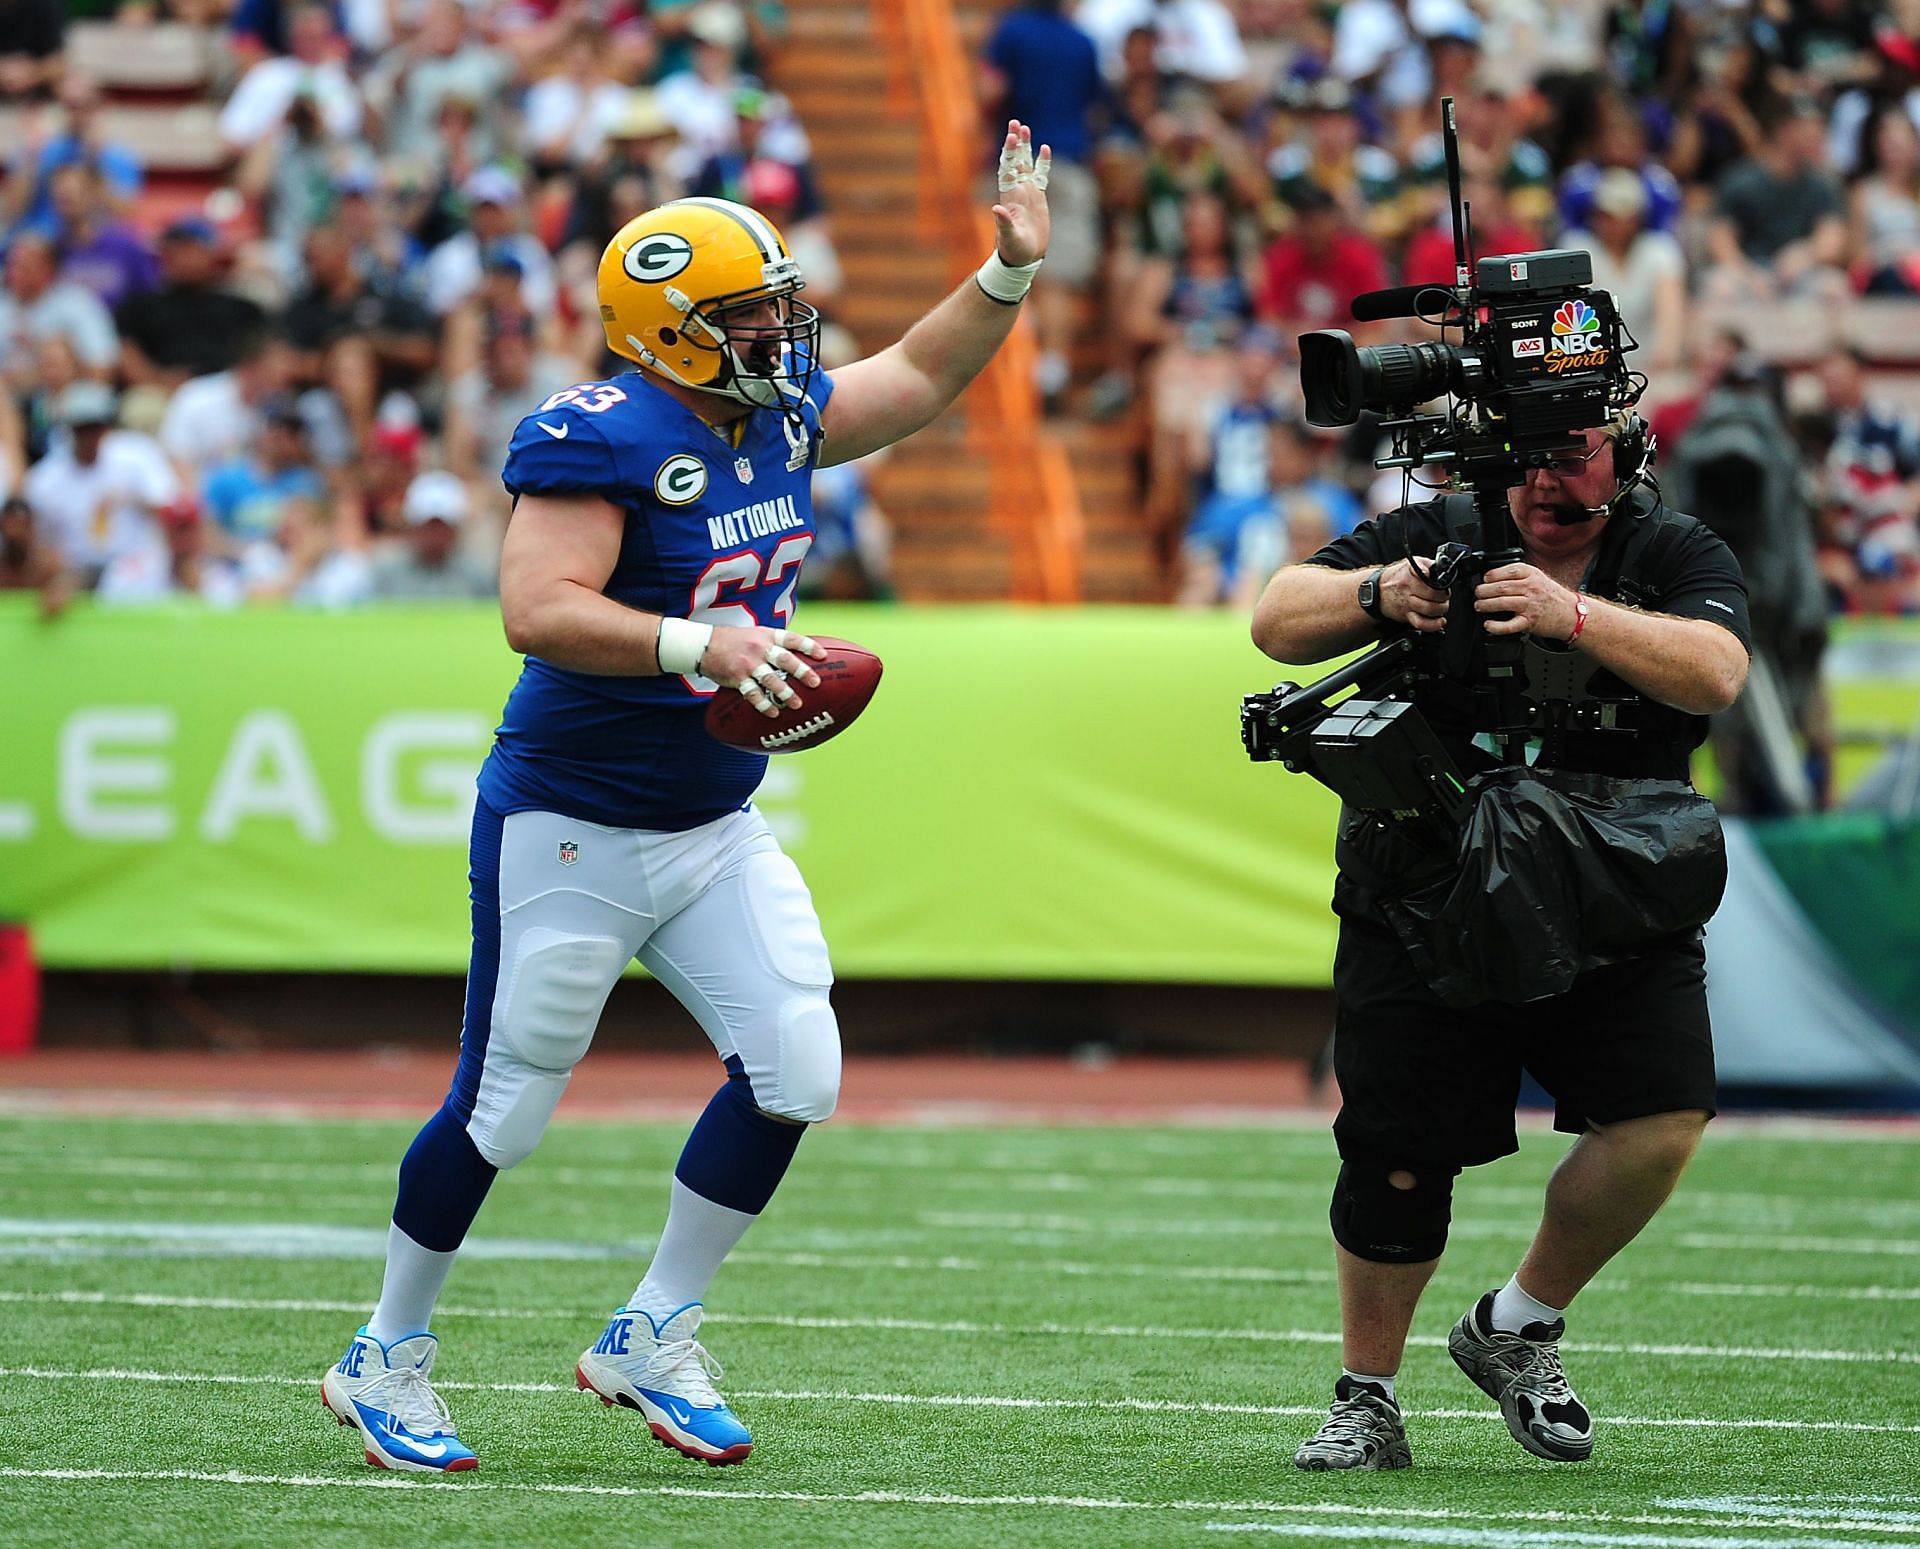 5 great moments from the NFL's Pro Bowl